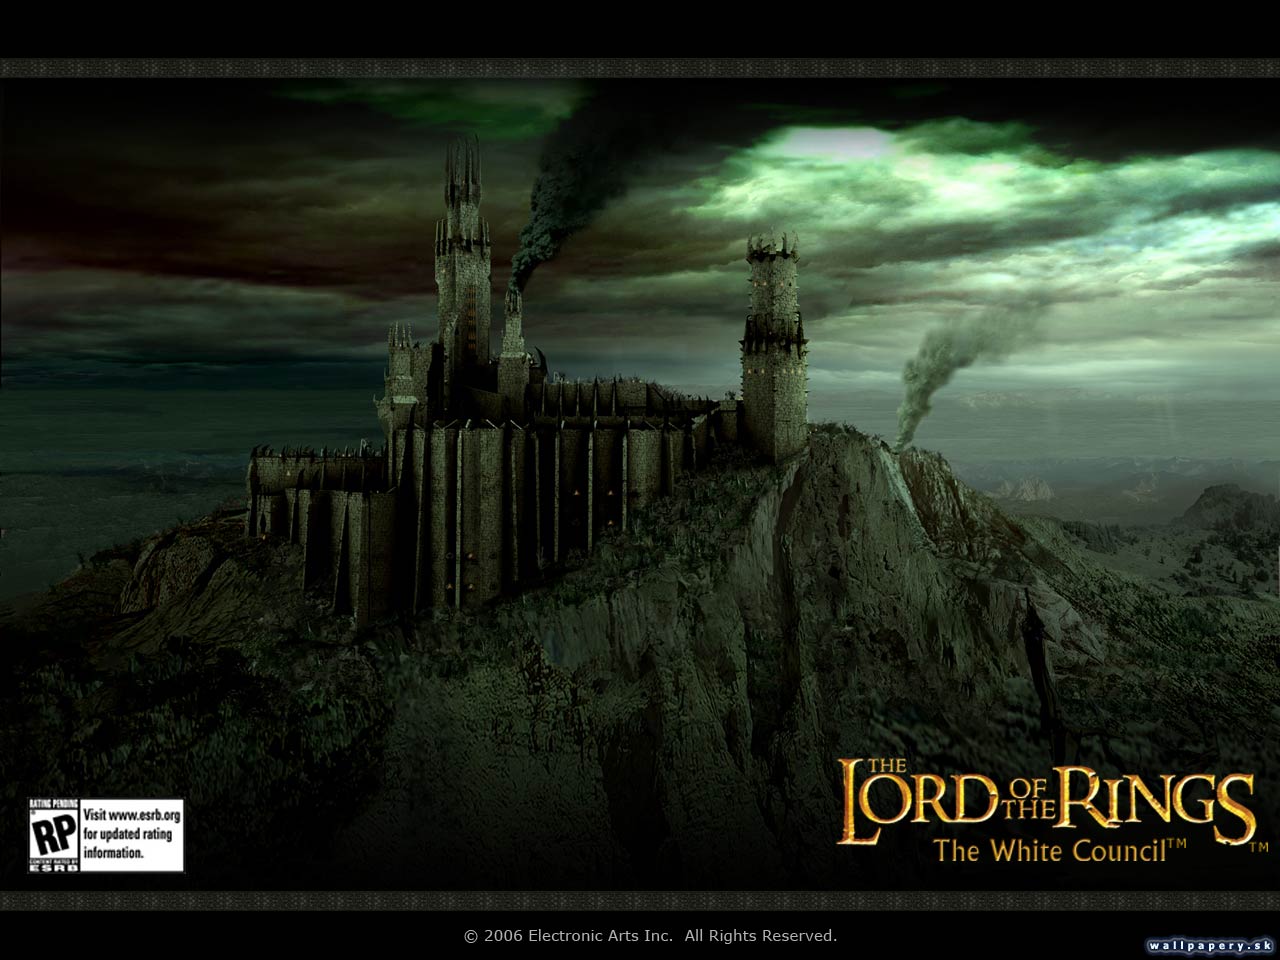 The Lord of the Rings: The White Council - wallpaper 2